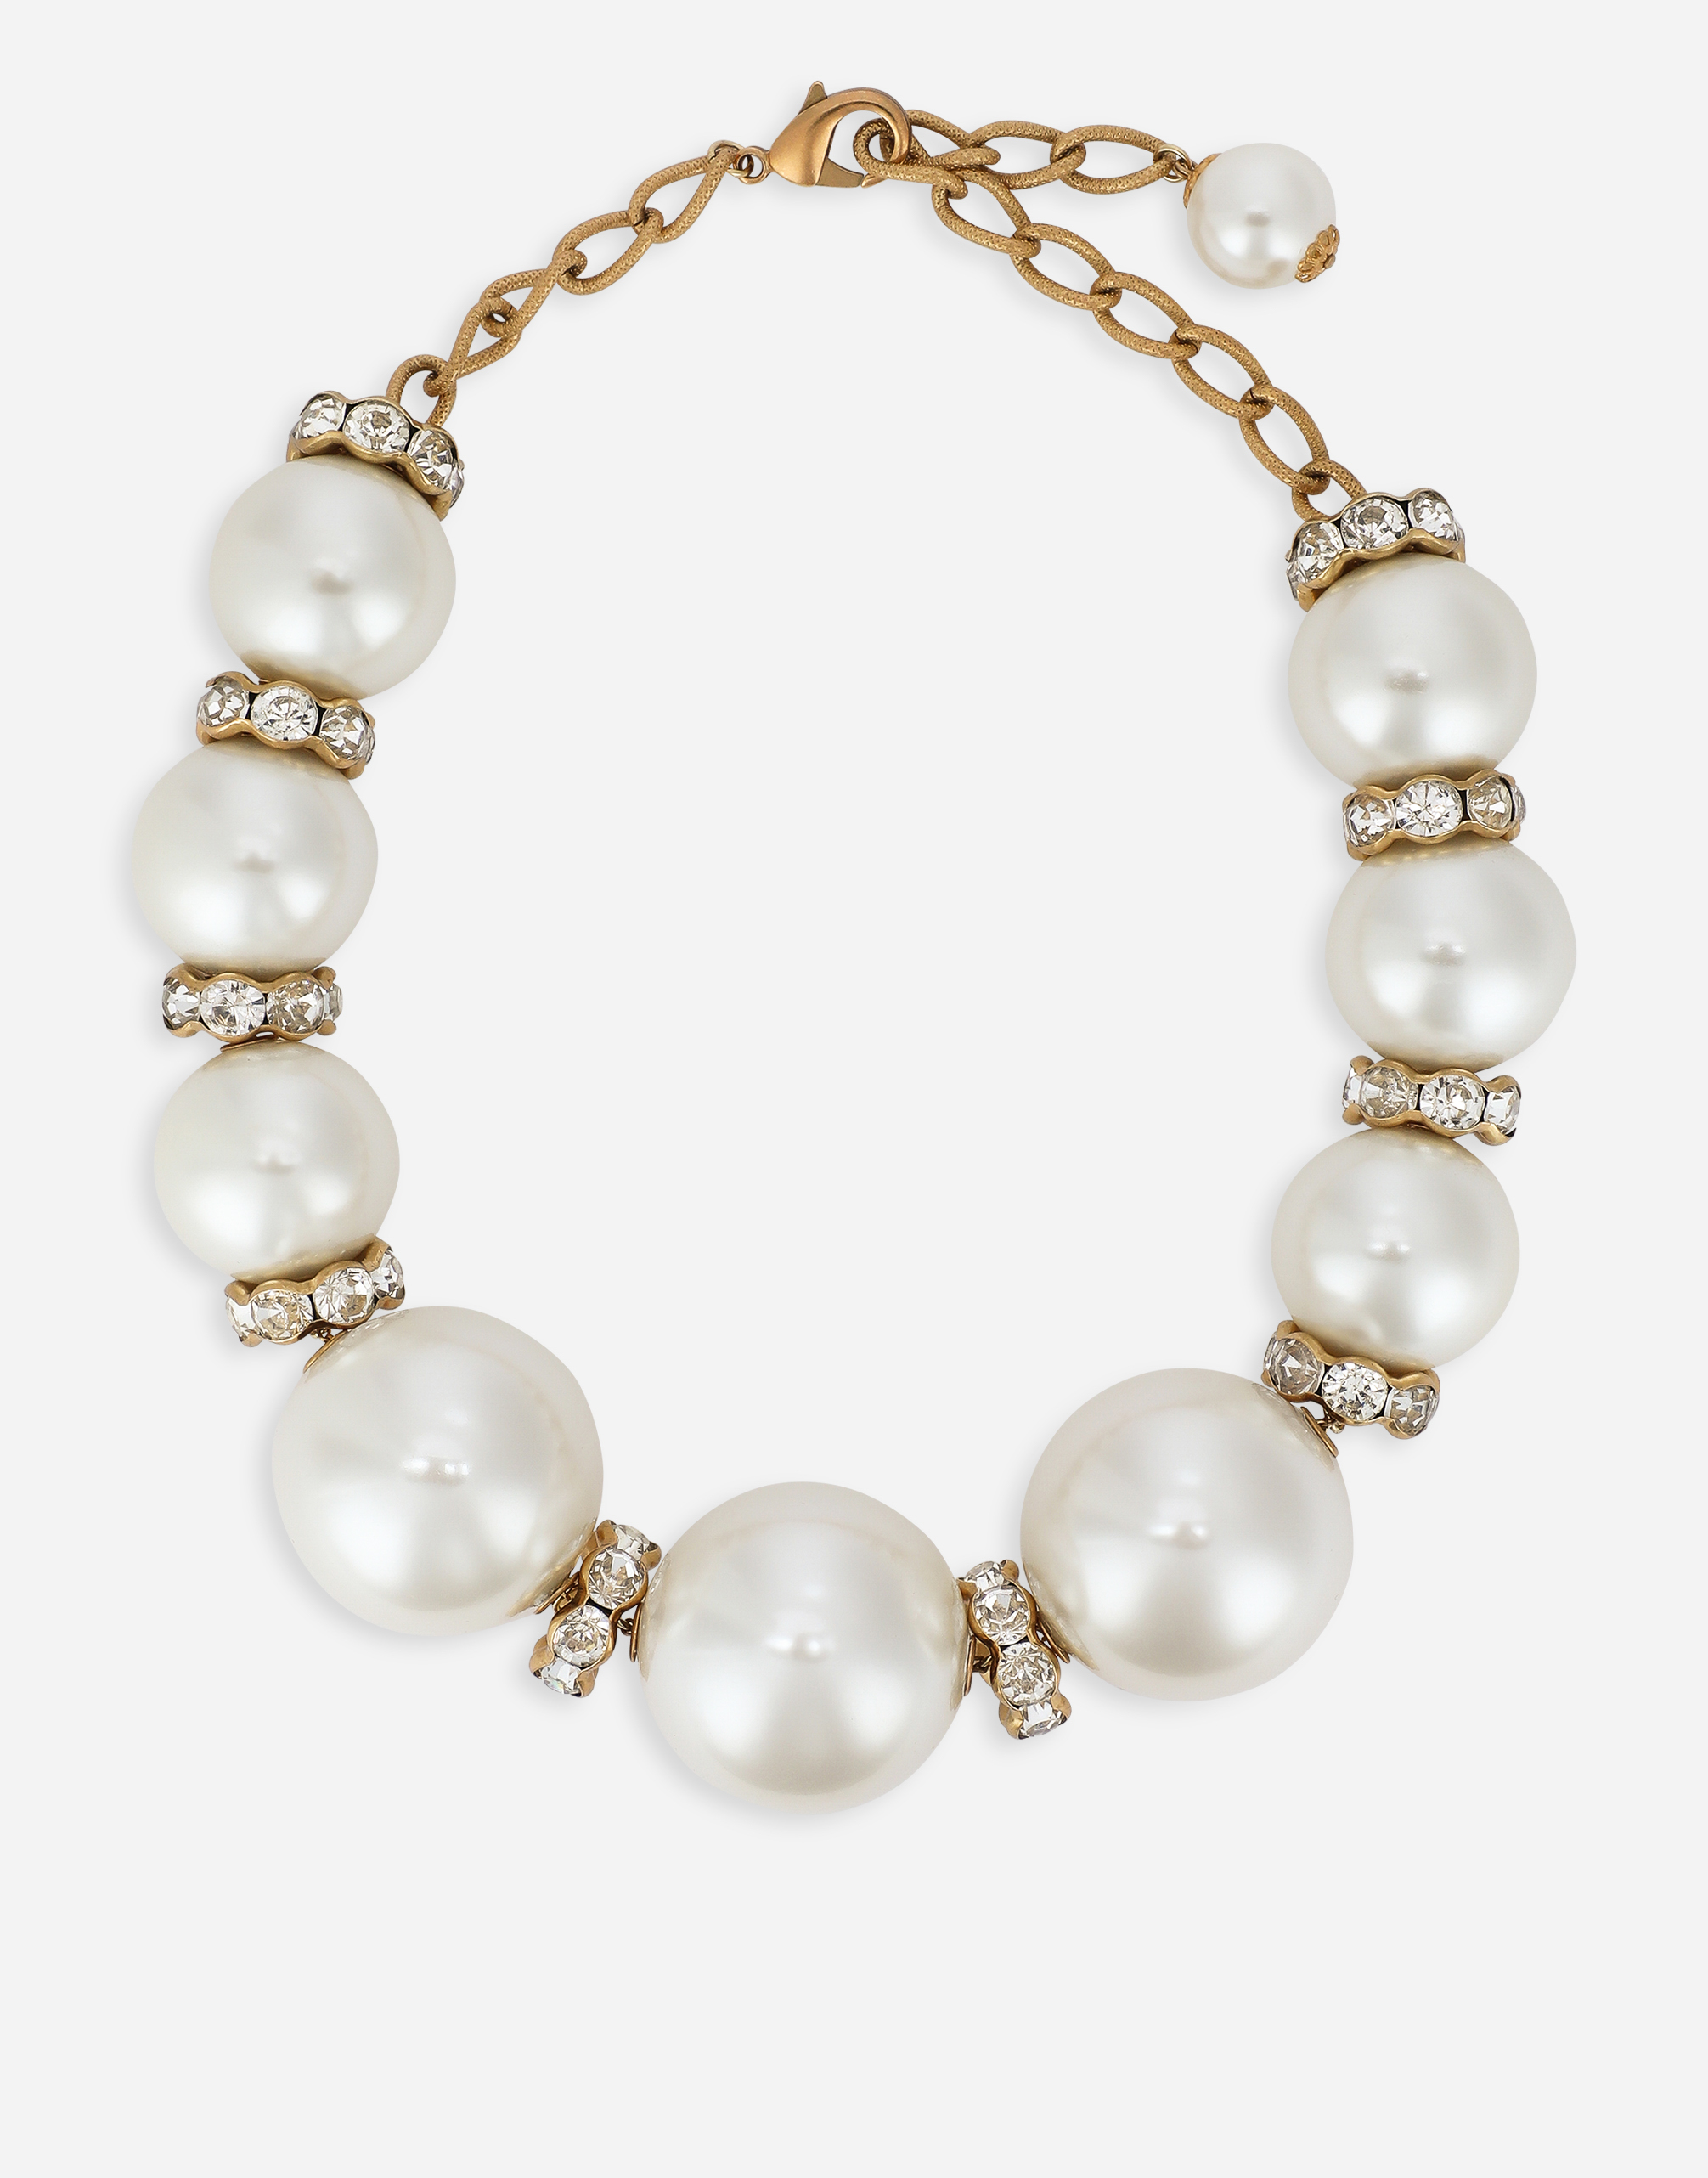 Short necklace with sphere and rhinestone accents in Gold